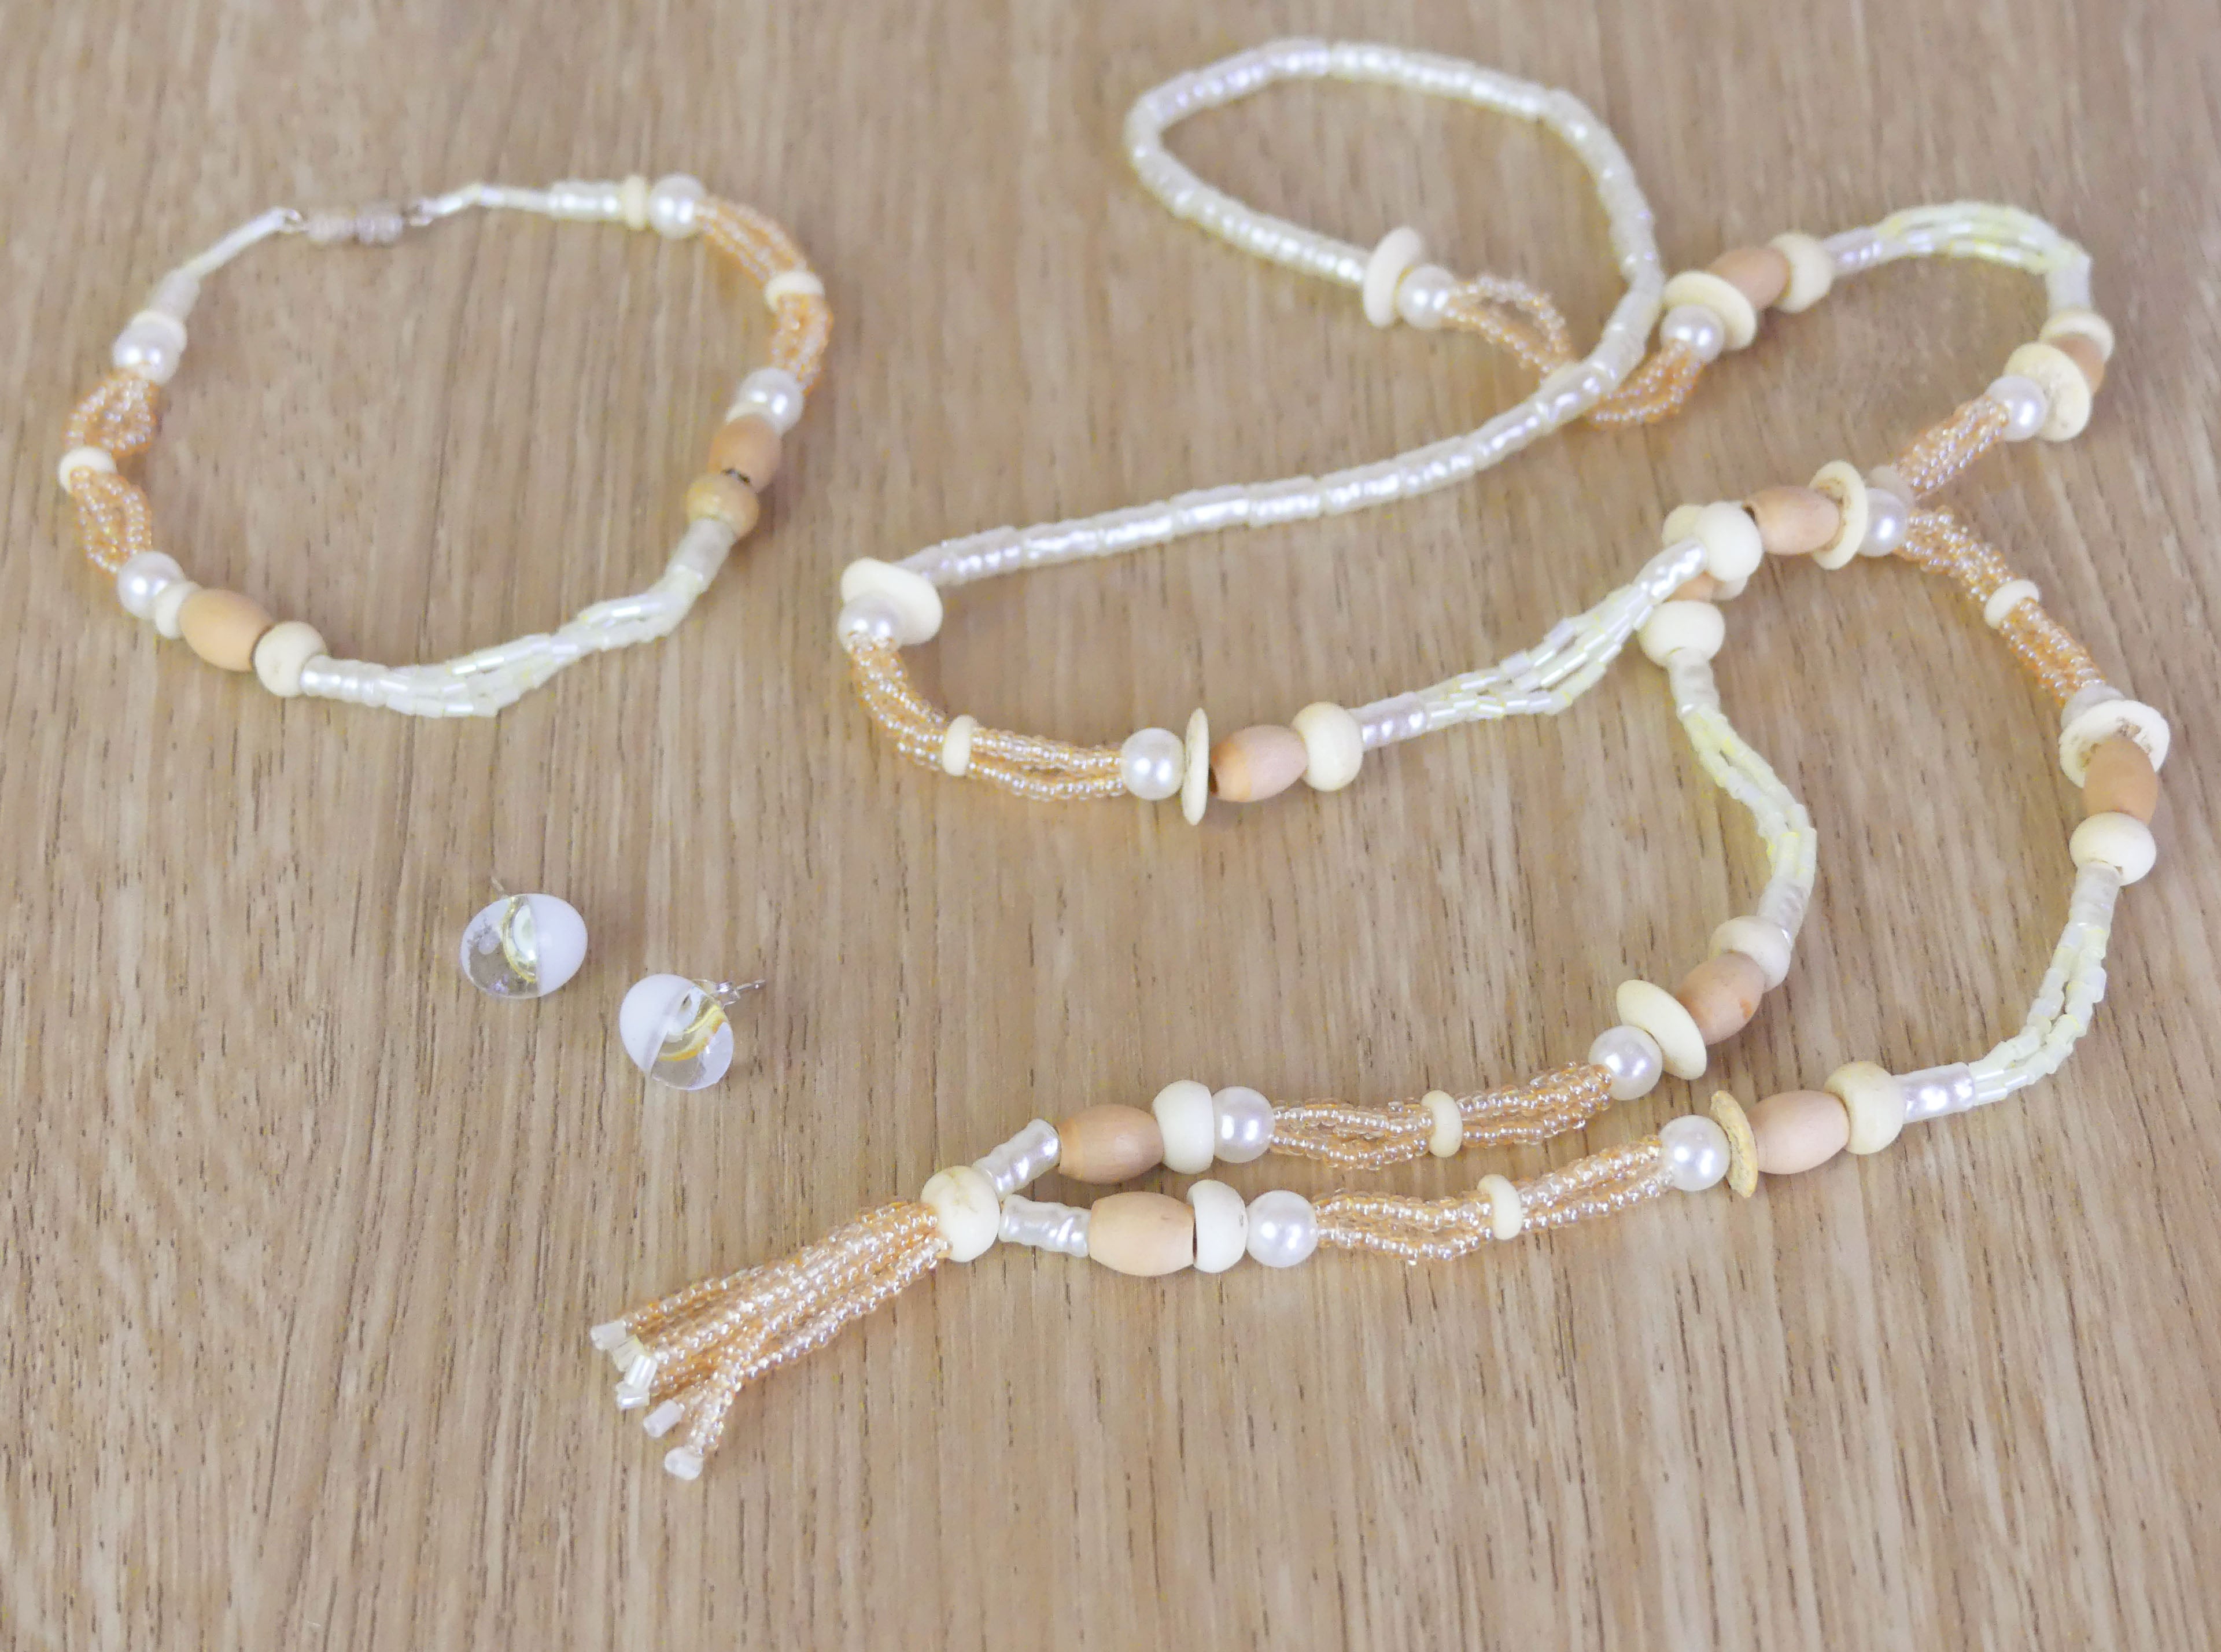 Beaded necklace, bracelet and glass earing set - natural